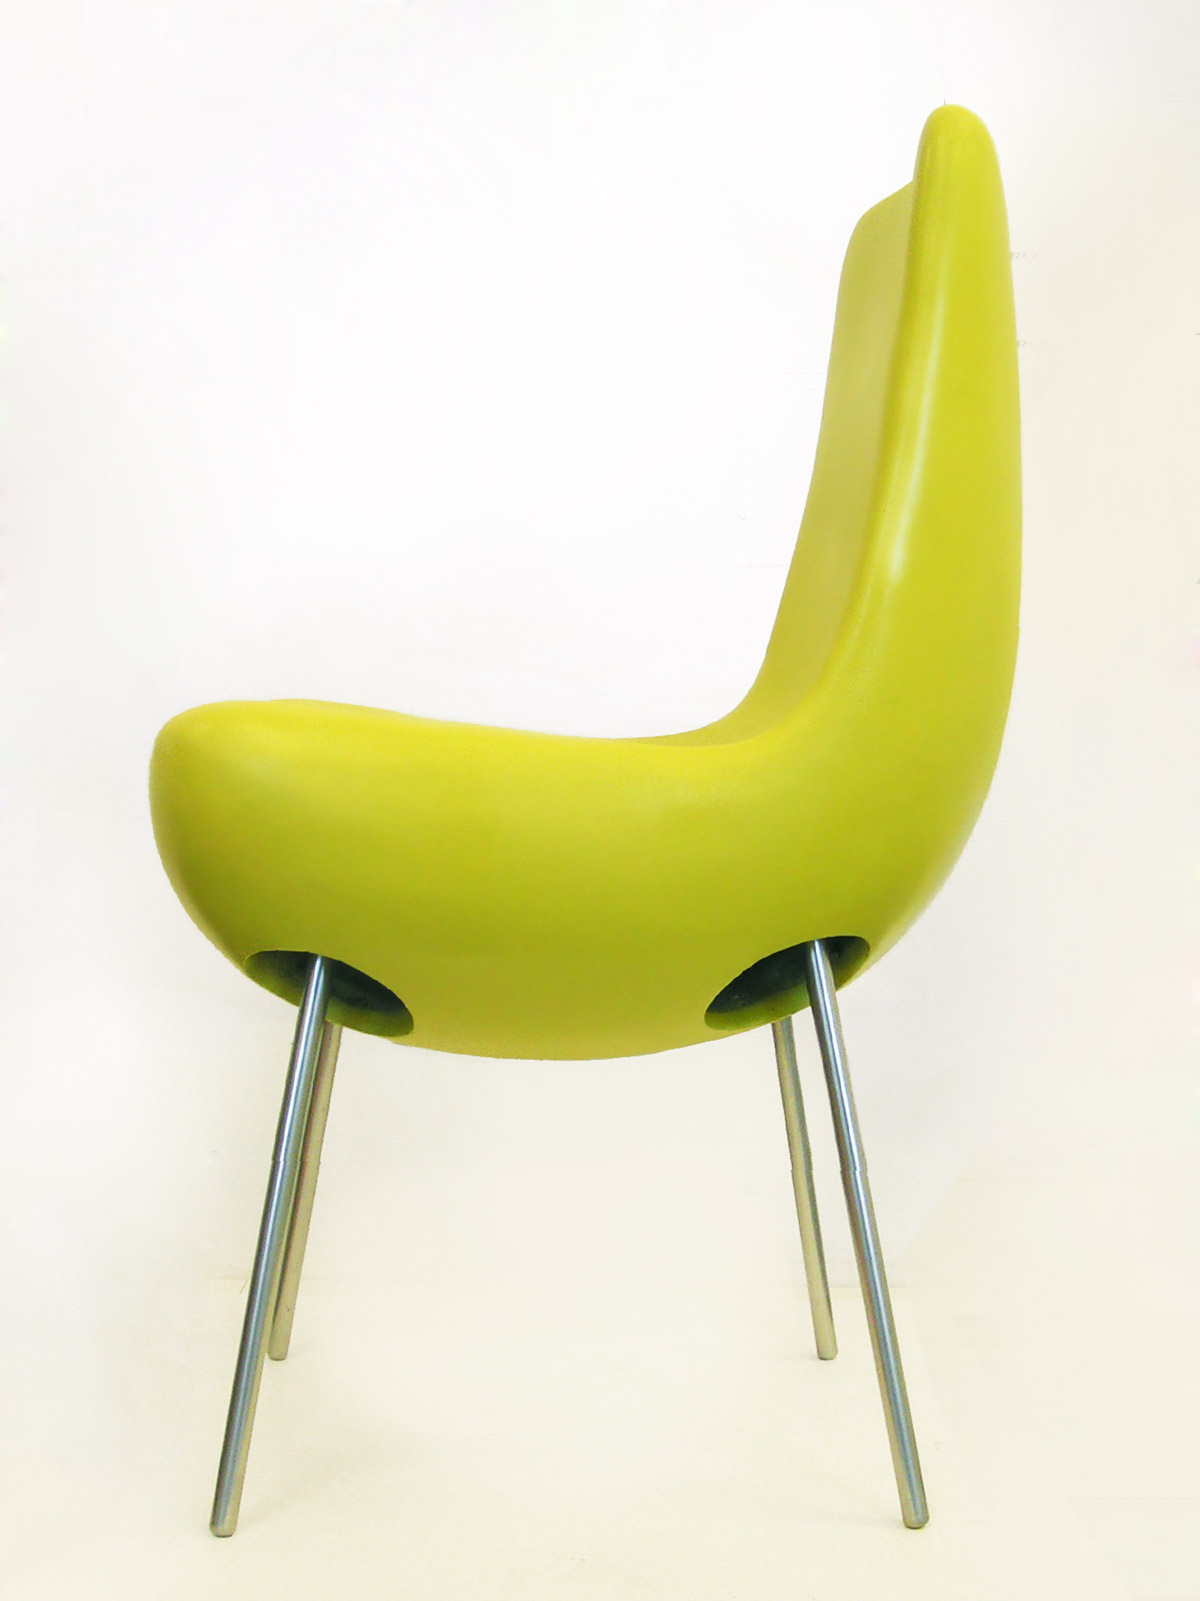 the chair is inspired with the new architectural design of National library in Prague